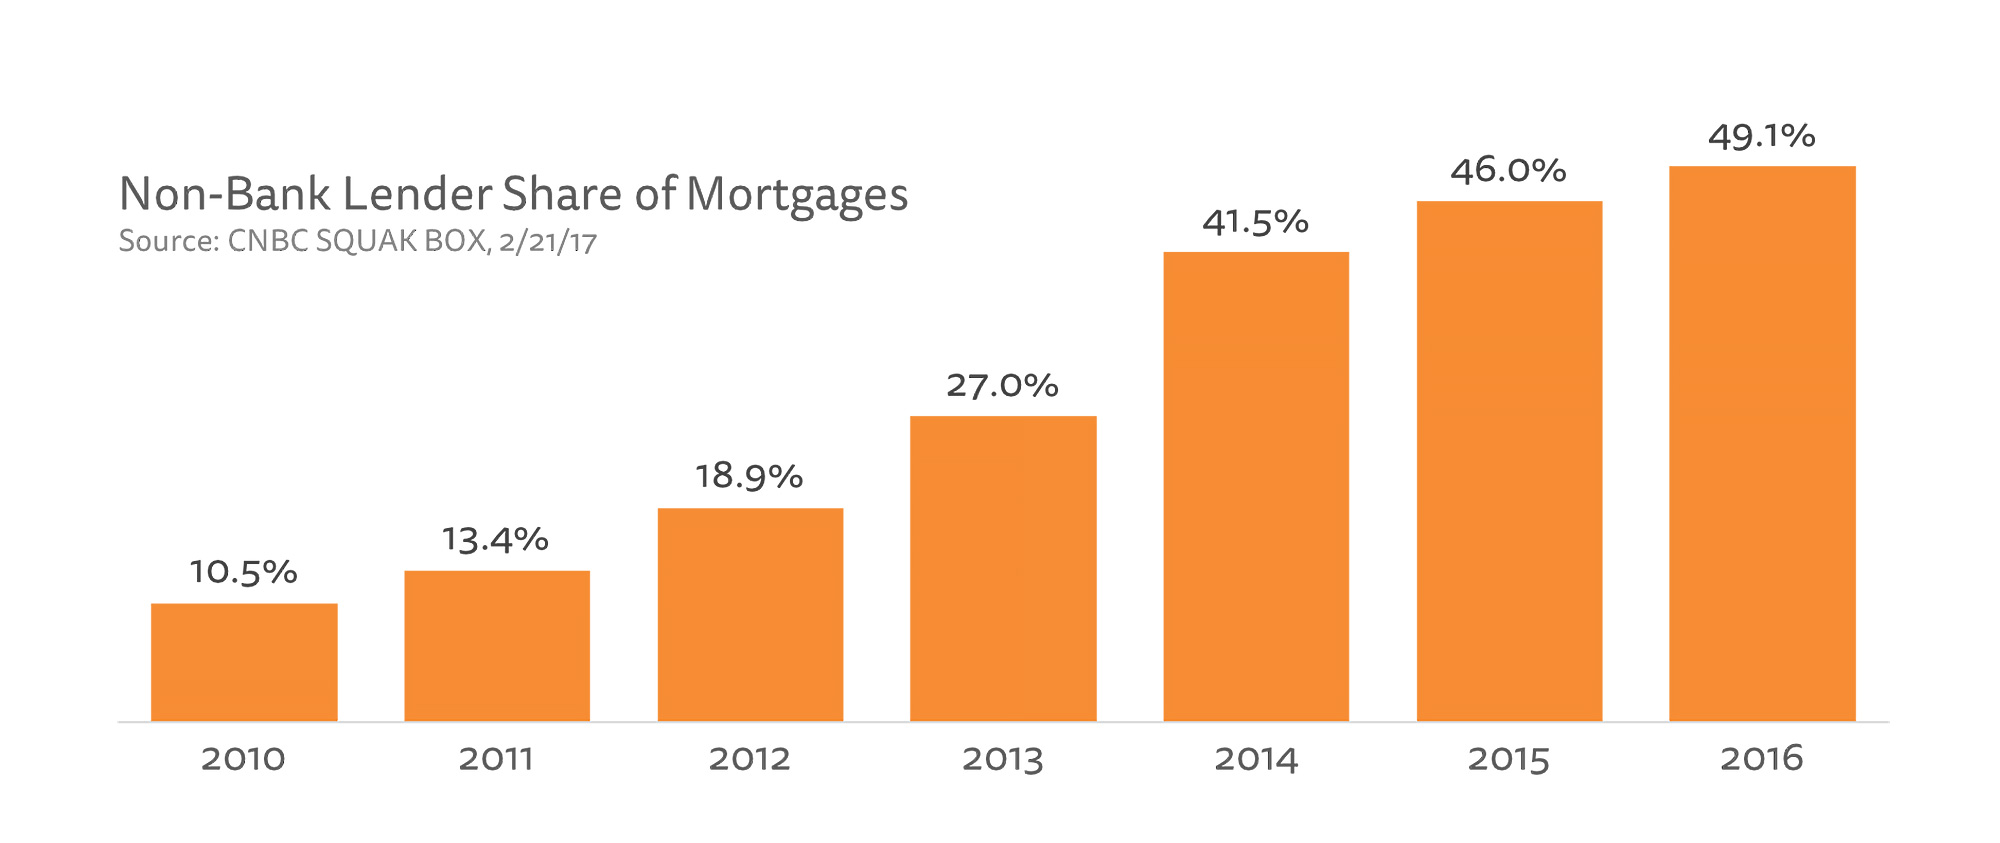 Non-Bank Lender Share of Mortgages